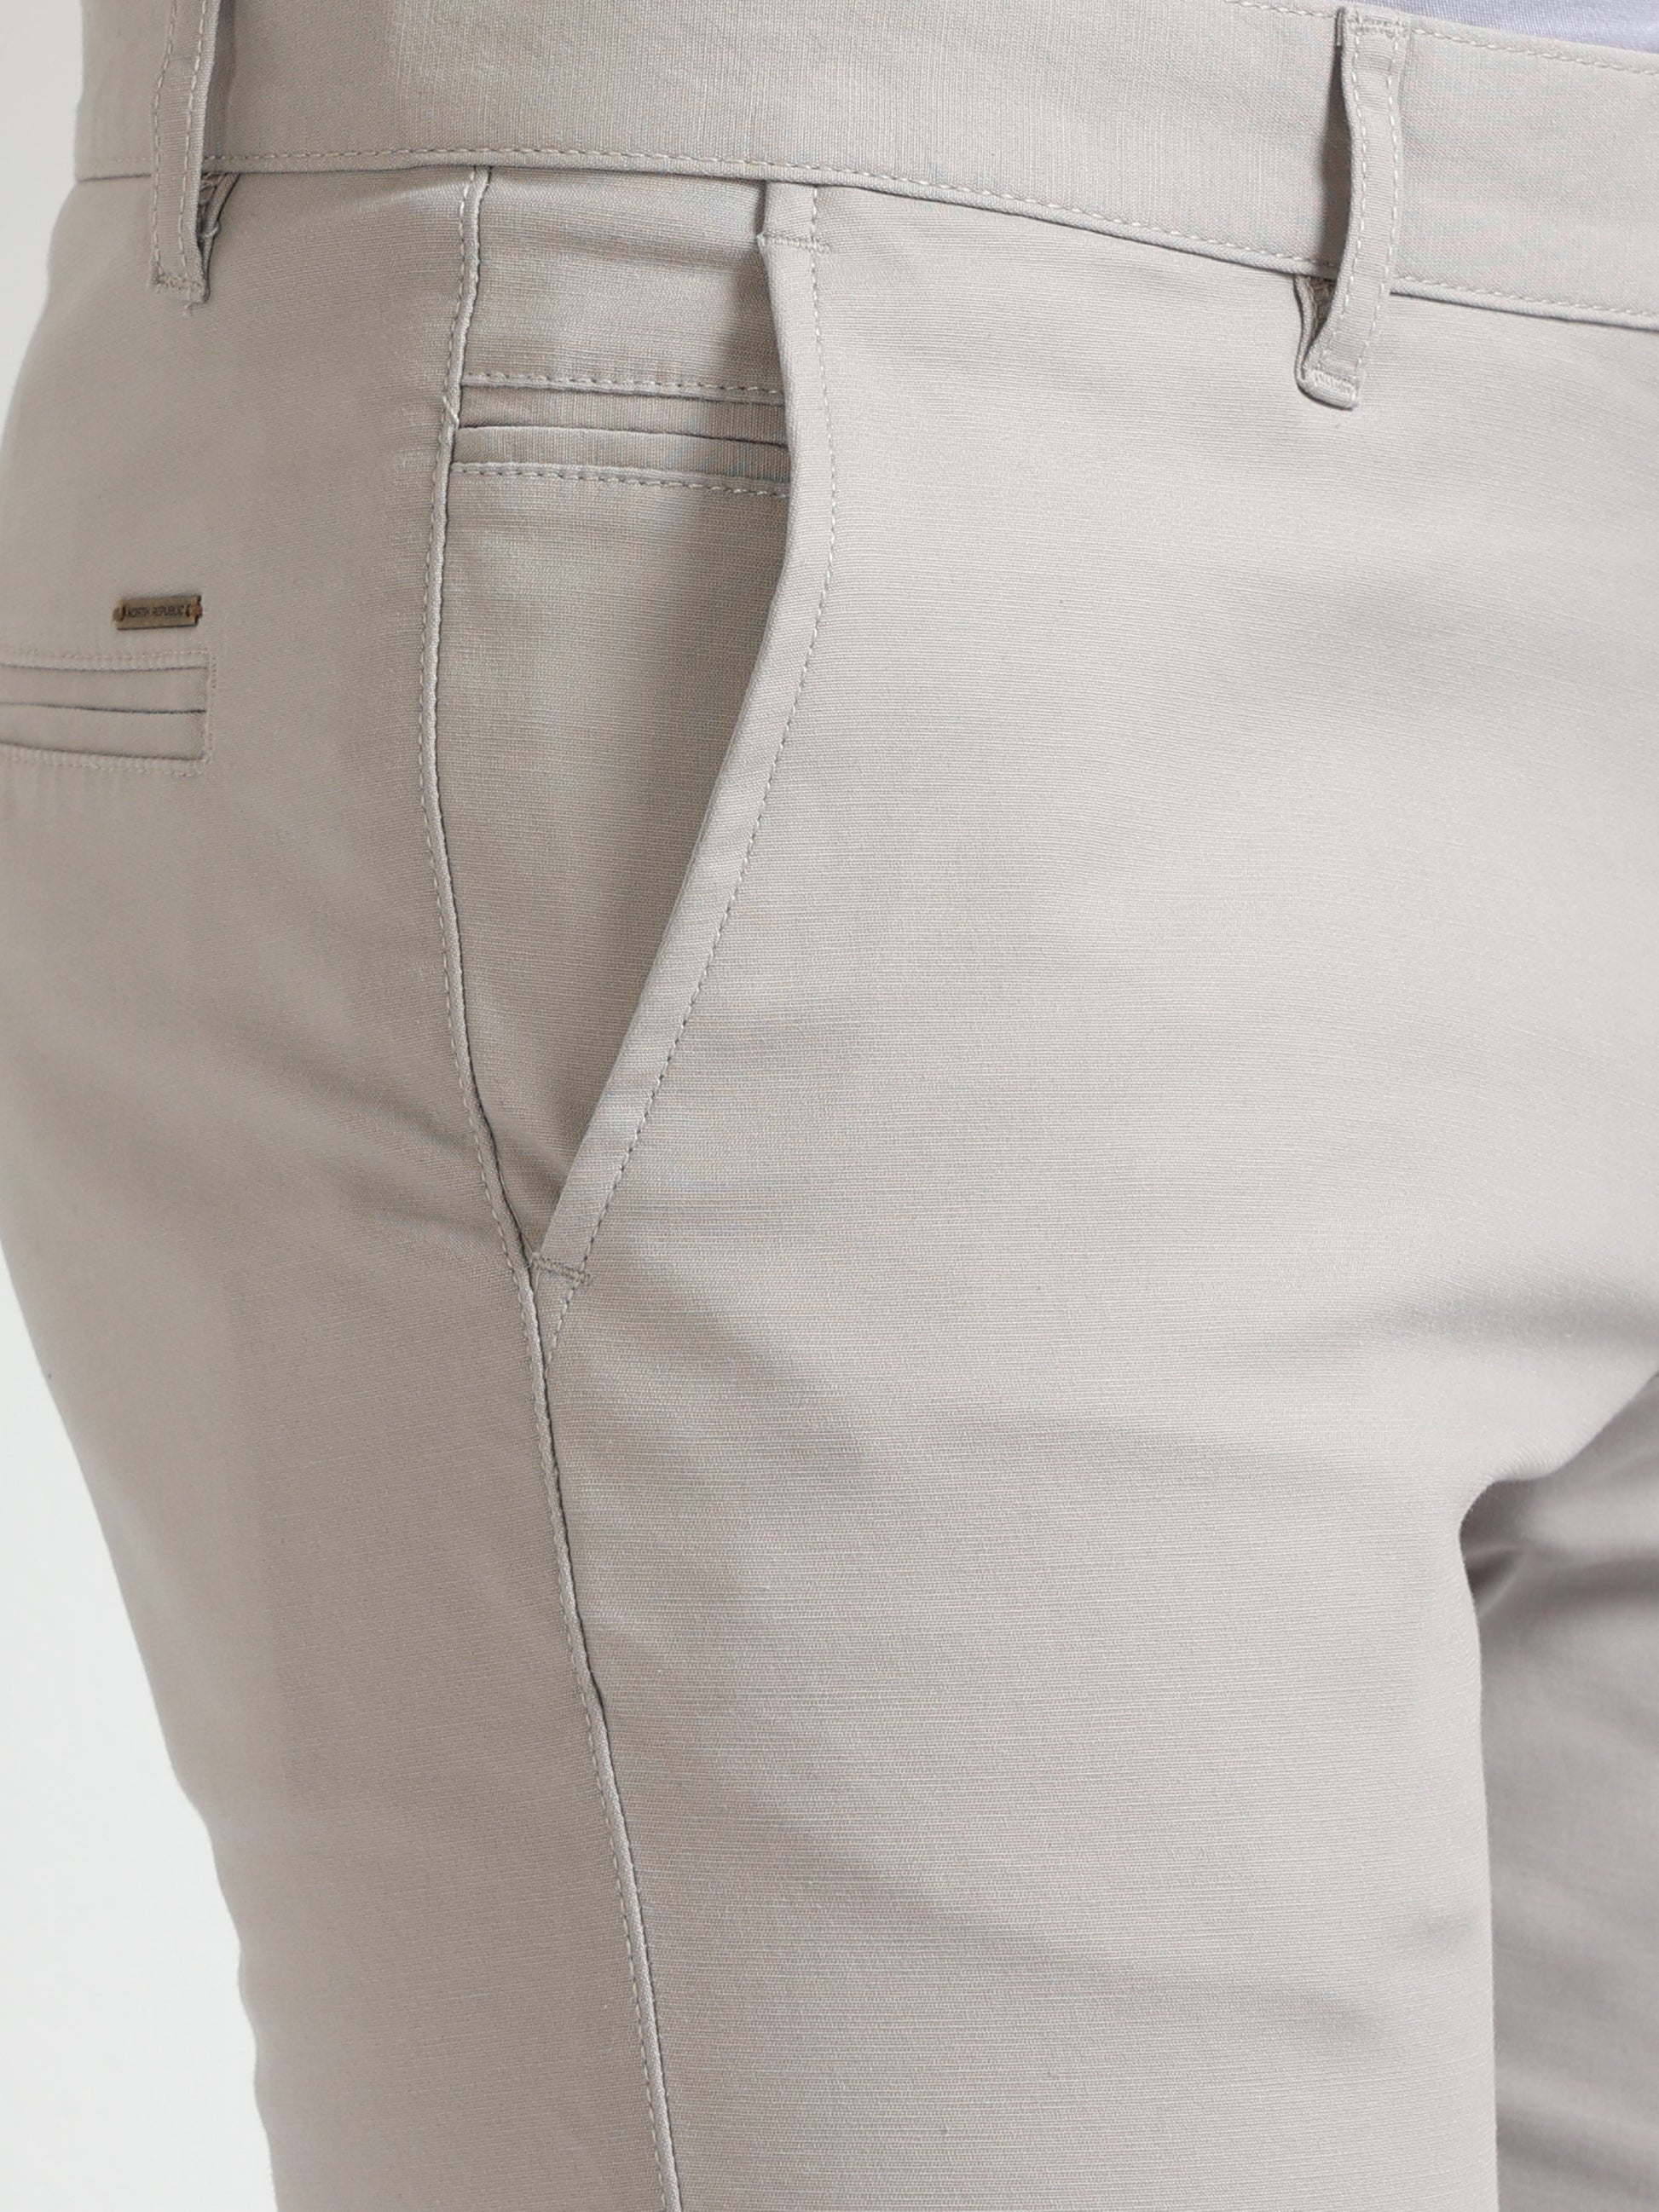 Buy Classy Cotton Stretch Trousers Online.